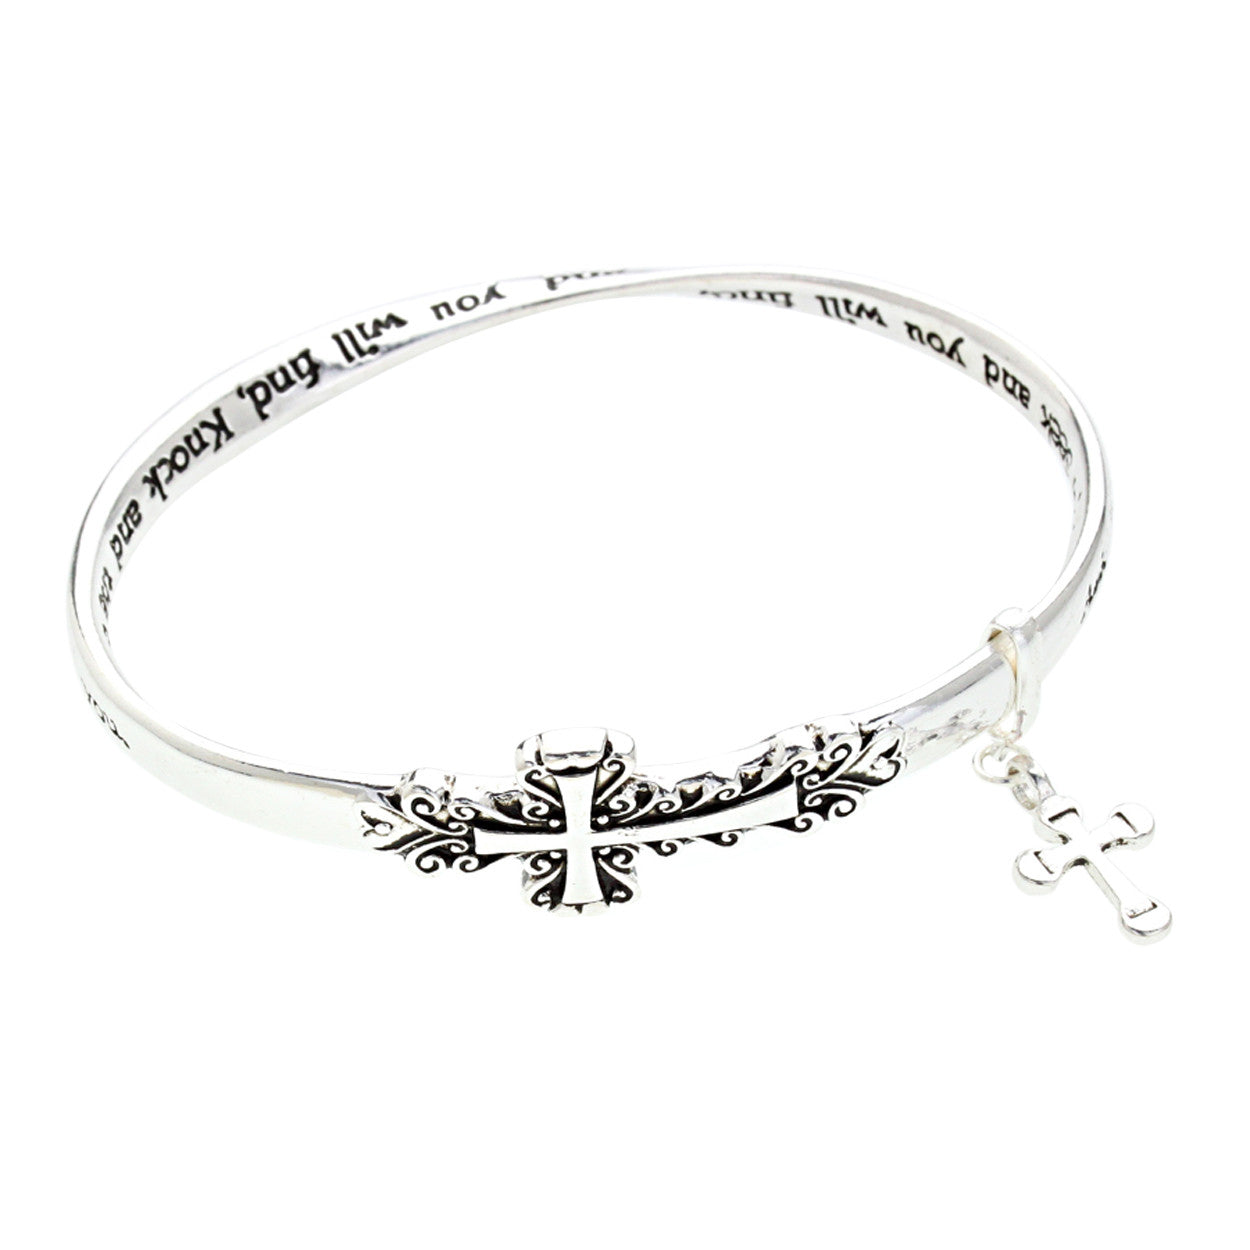 Sentimental Cross Charm Twist Inspirational Bracelet with Engraved Quote